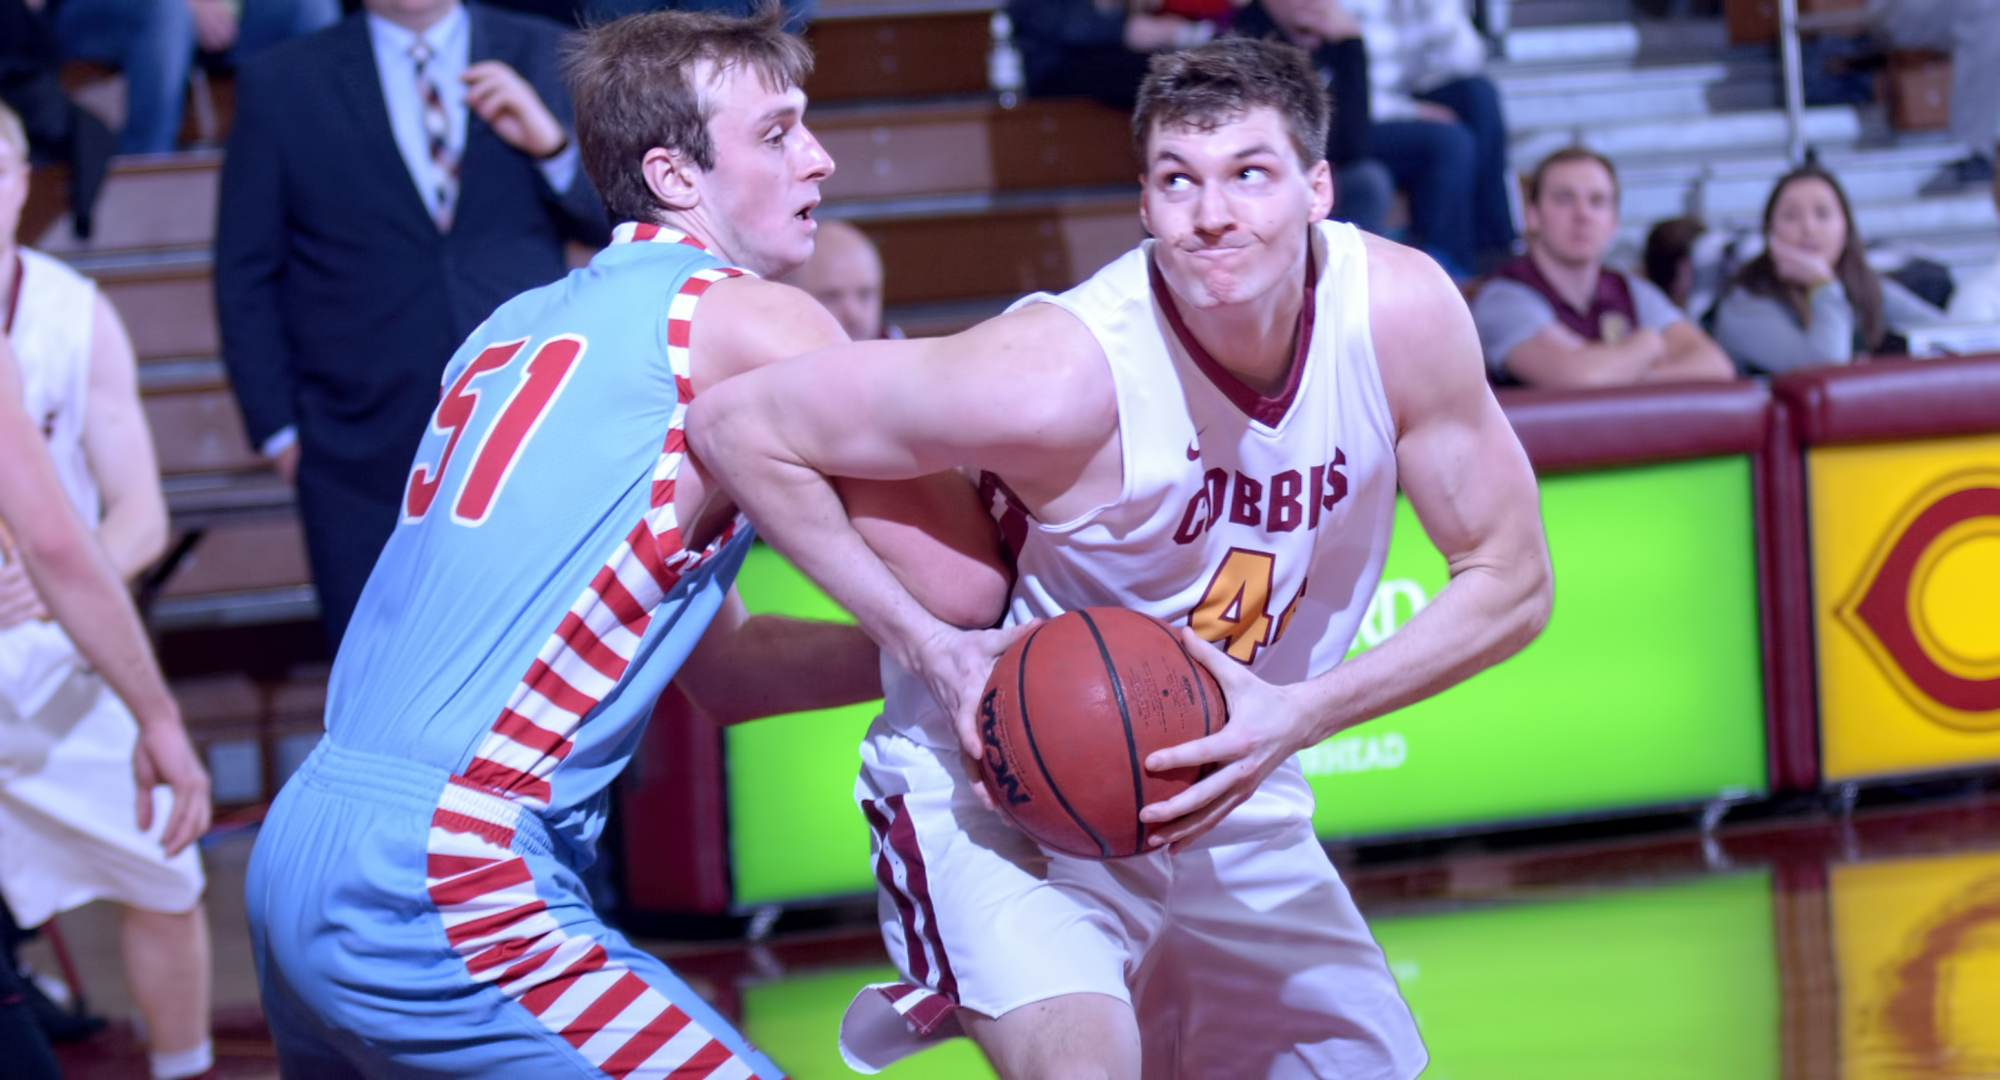 Senior Kevin Wolfe tries to break free from a St. John's defender during the Cobbers' first MIAC game of 2018. Wolfe went 7-for-11 from the floor and finished with a team-high 17 points.